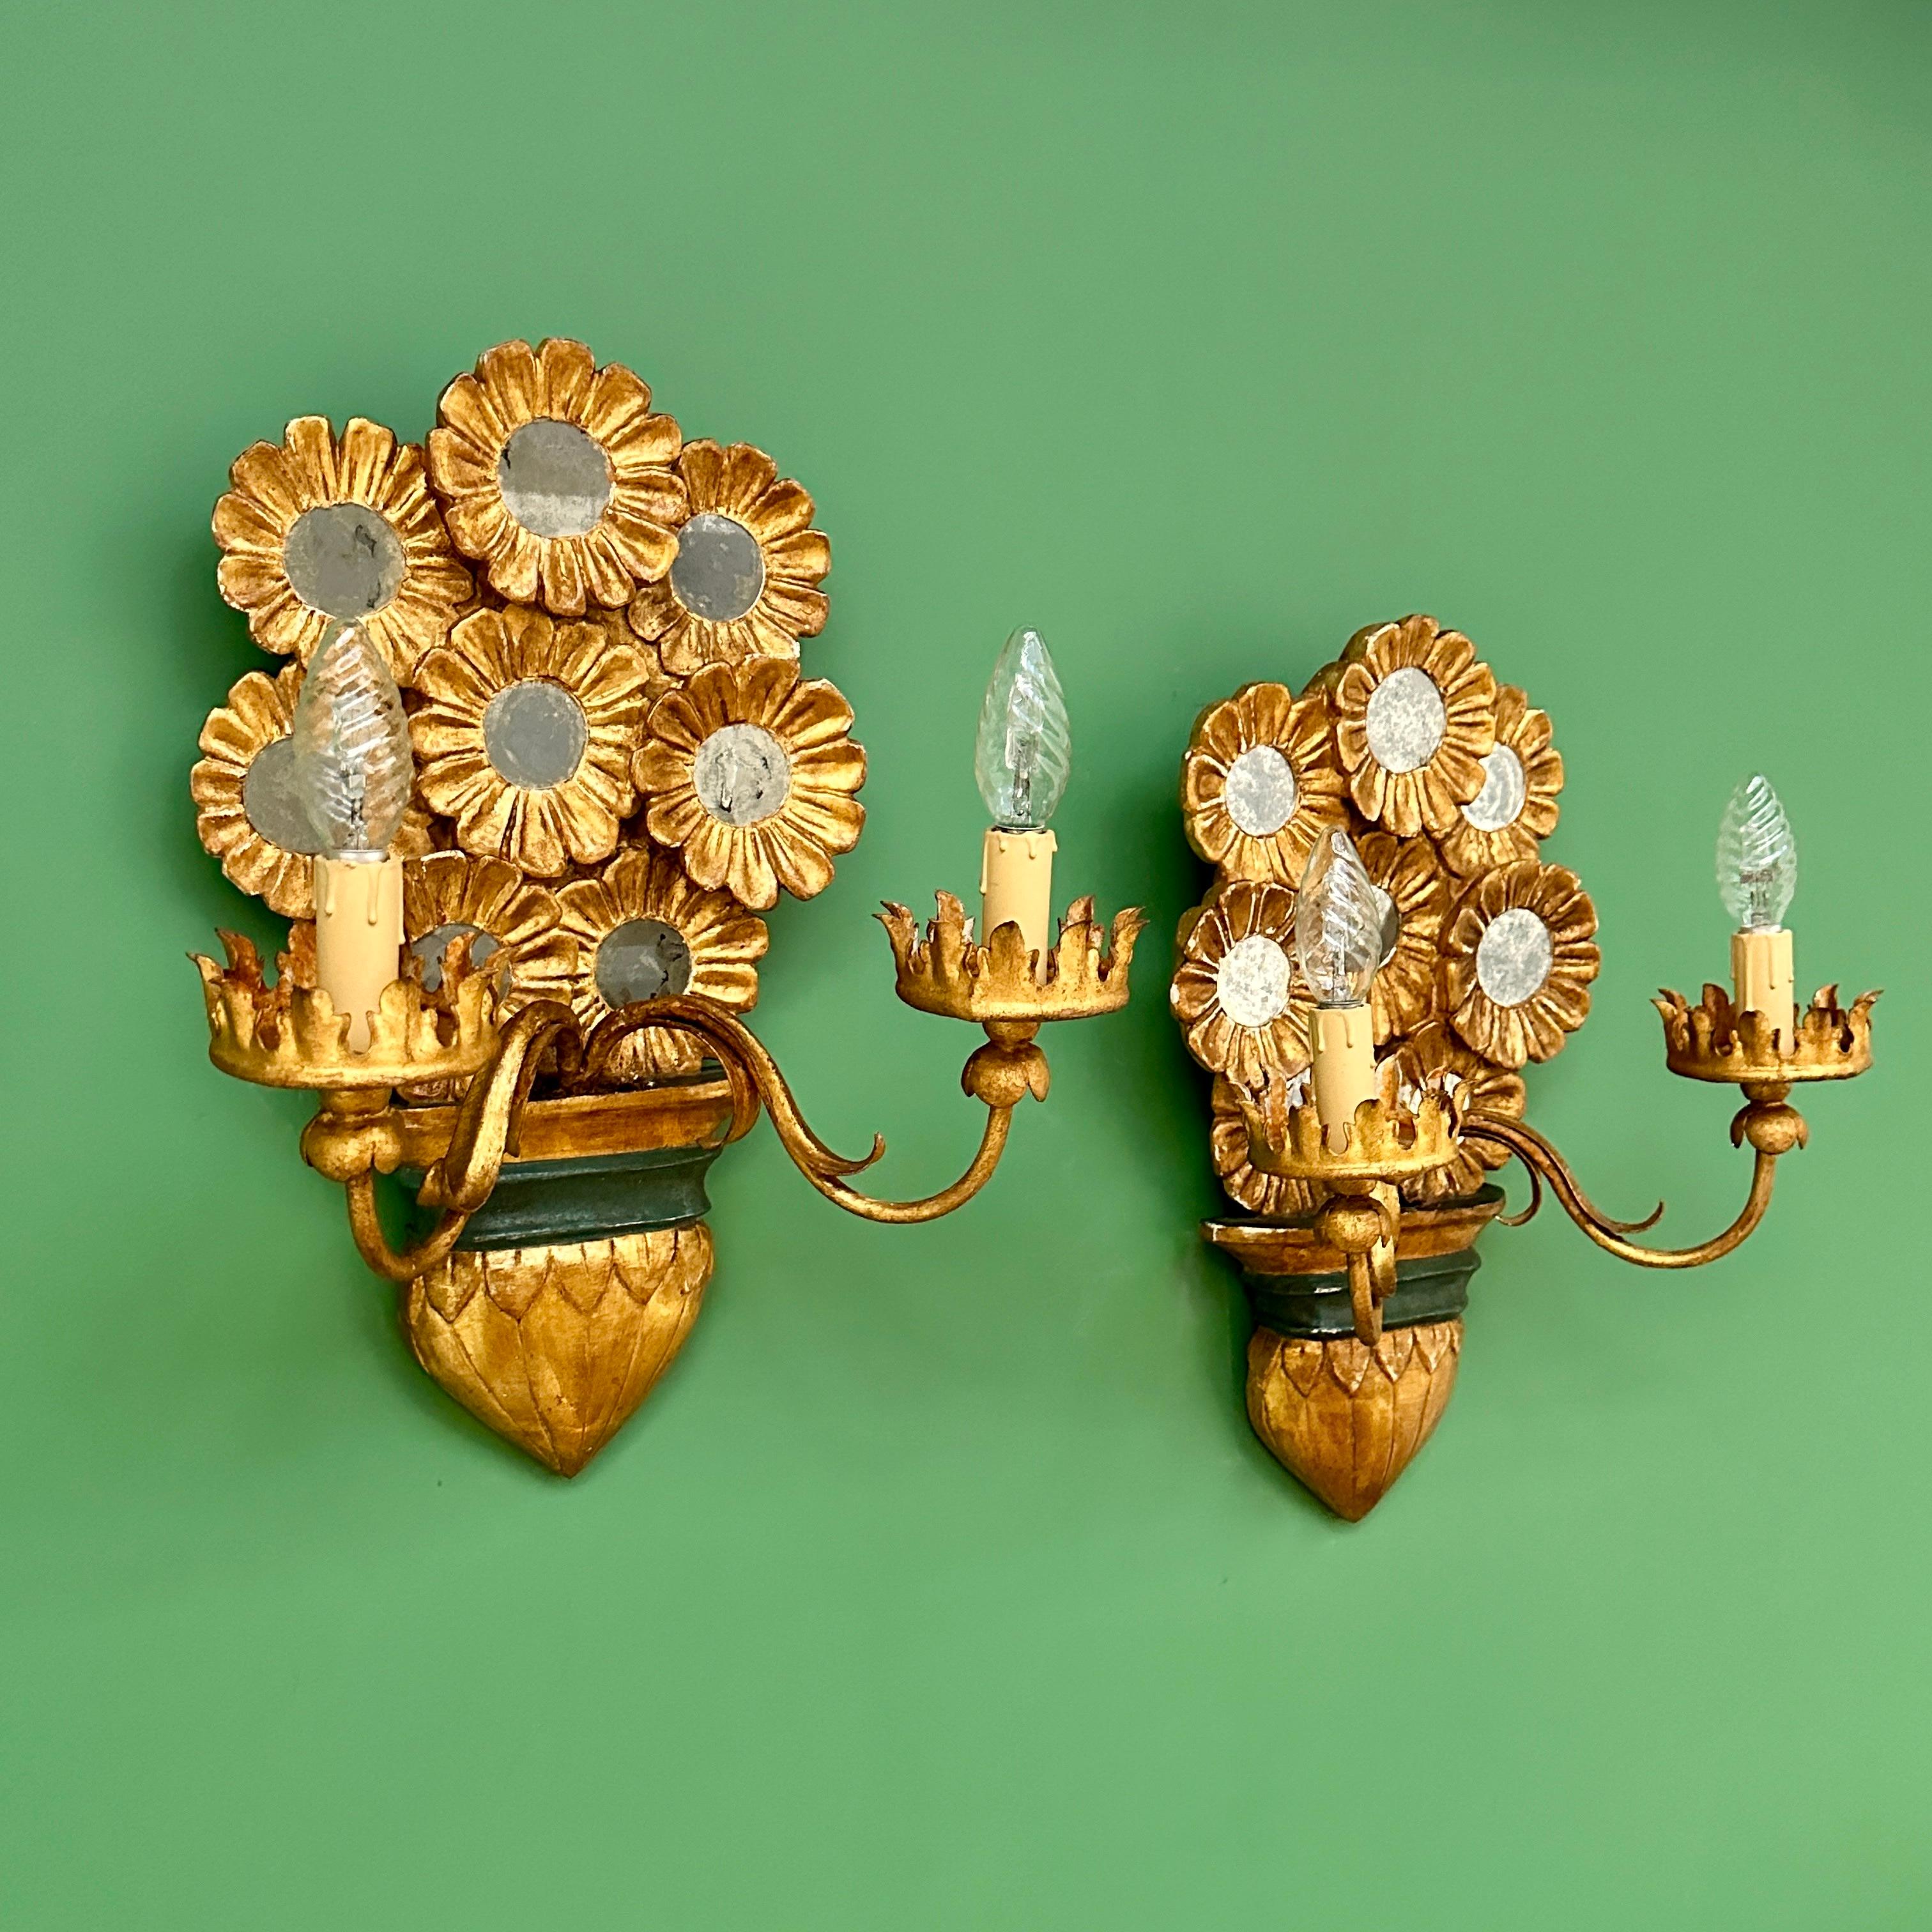 Baroque Pair Of Early C20th Italian Giltwood Wall Lights (1 of 2 pairs available) For Sale